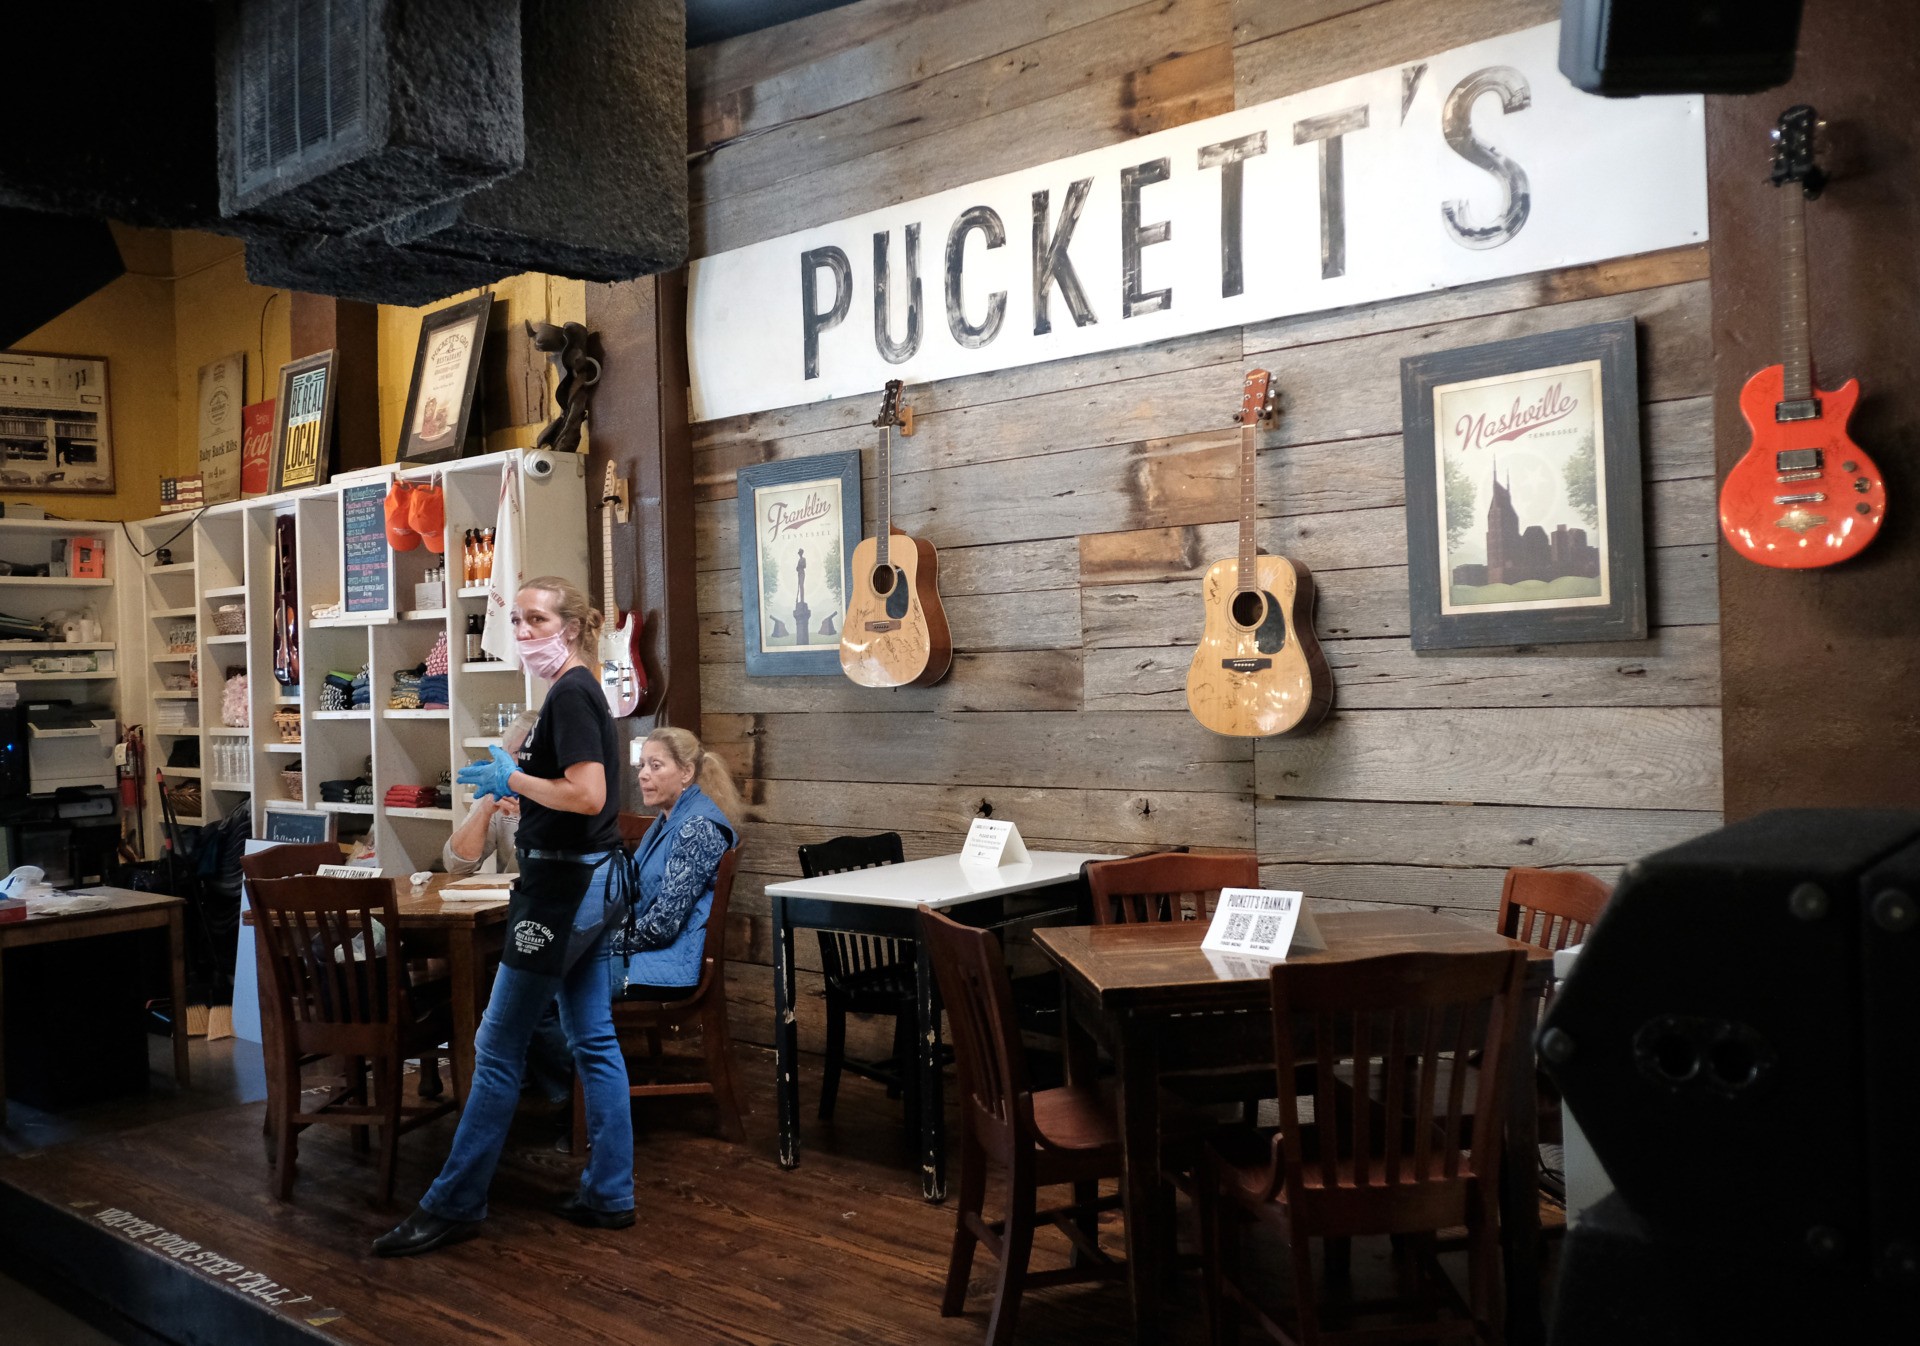 NASHVILLE, TENNESSEE - APRIL 27: A waitress wearing rubber gloves and a mask takes orders from patrons at Puckett's Grocery & Restaurant on April 27, 2020 in Franklin, Tennessee. Tennessee is one of the first states to reopen restaurants after the onset of the COVID-19 pandemic. Restaurants are permitted to open at 50 percent capacity but required to maintain social distancing. (Photo by Jason Kempin/Getty Images)